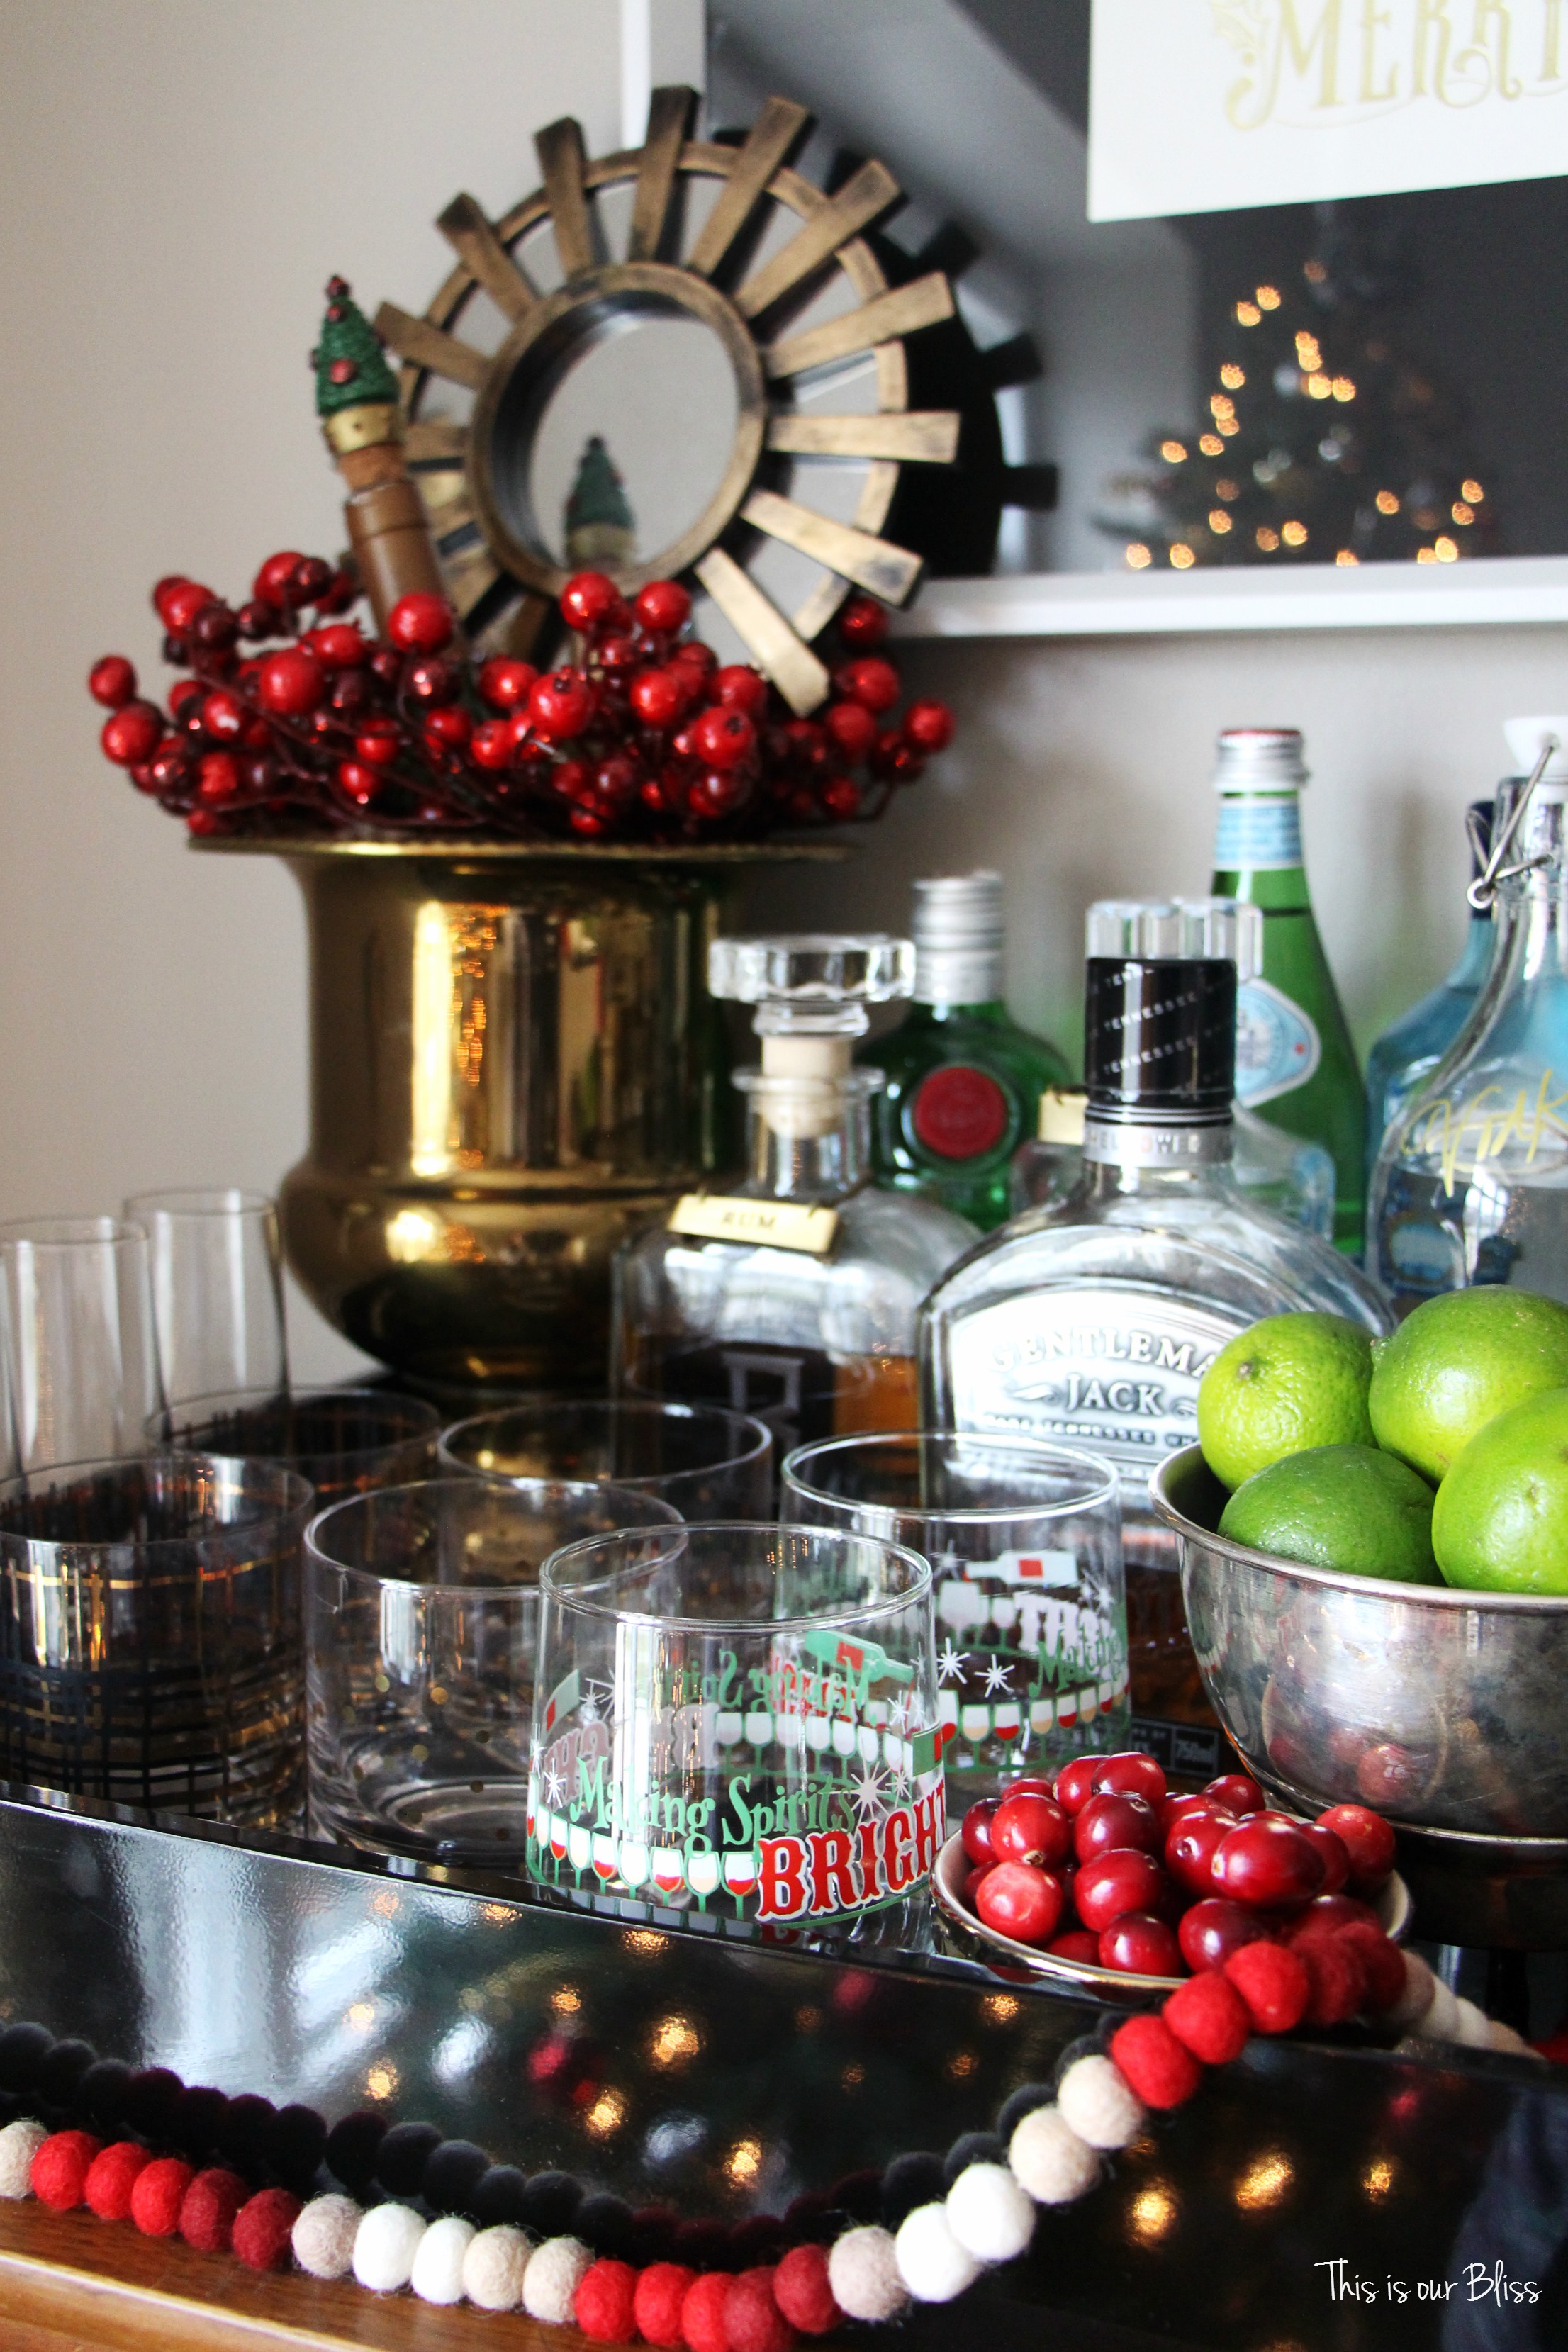 https://thisisourbliss.com/wp-content/uploads/2015/12/holiday-bar-tray-barware-bar-accessories-bar-cart-styling-holiday-bar-christmas-spirits-This-is-our-bliss.jpg